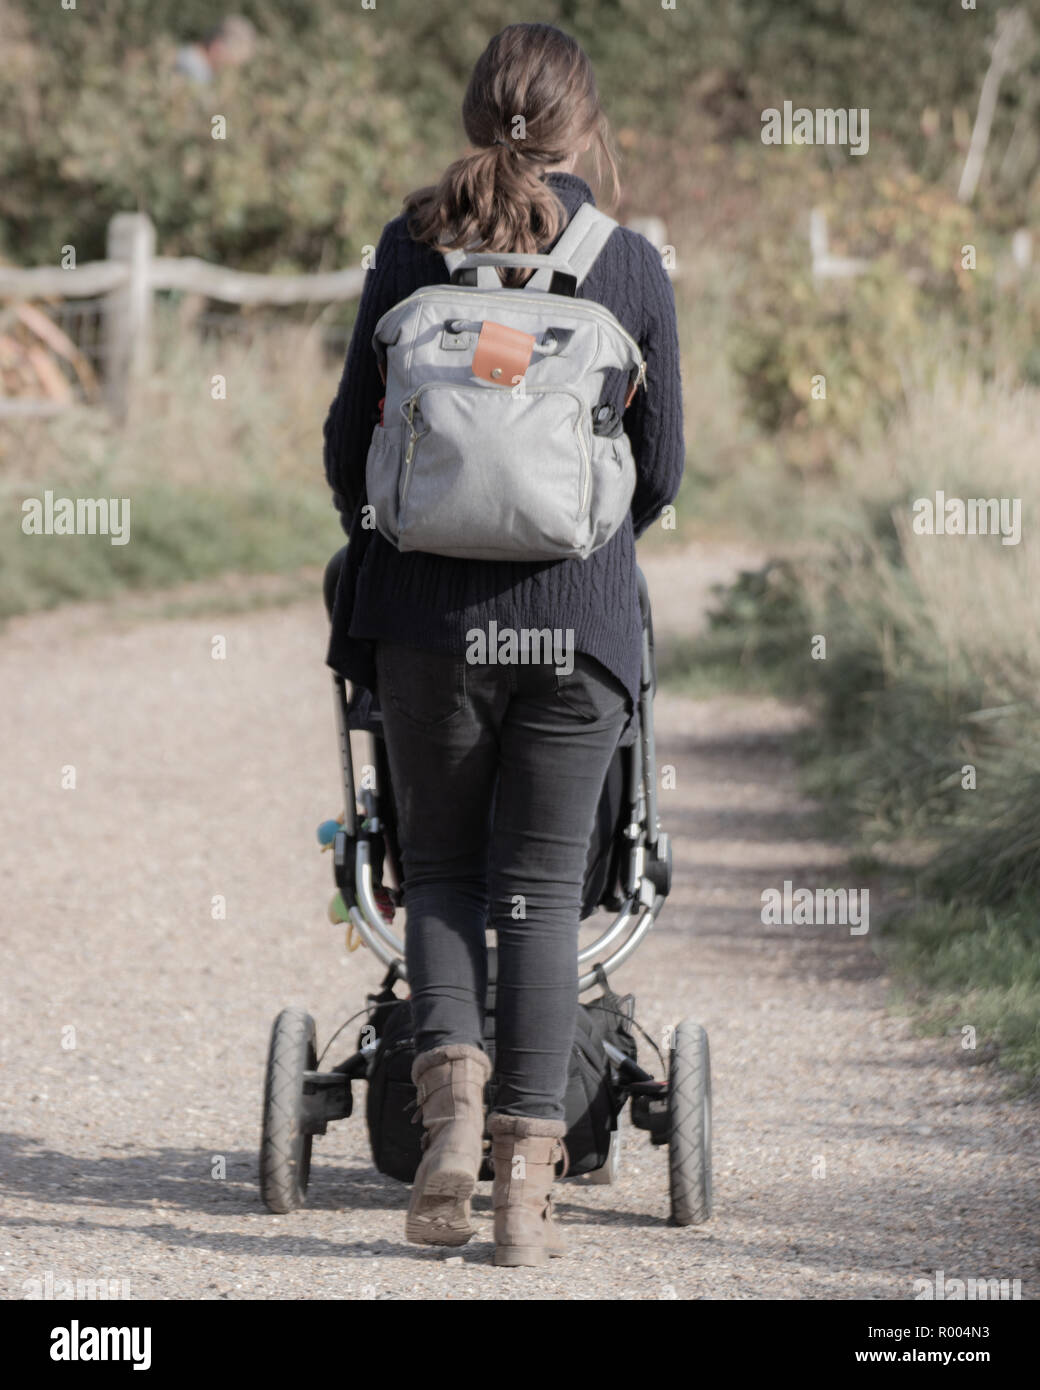 A mother wearing a backpack pushing stroller or pushchair on a country path Stock Photo